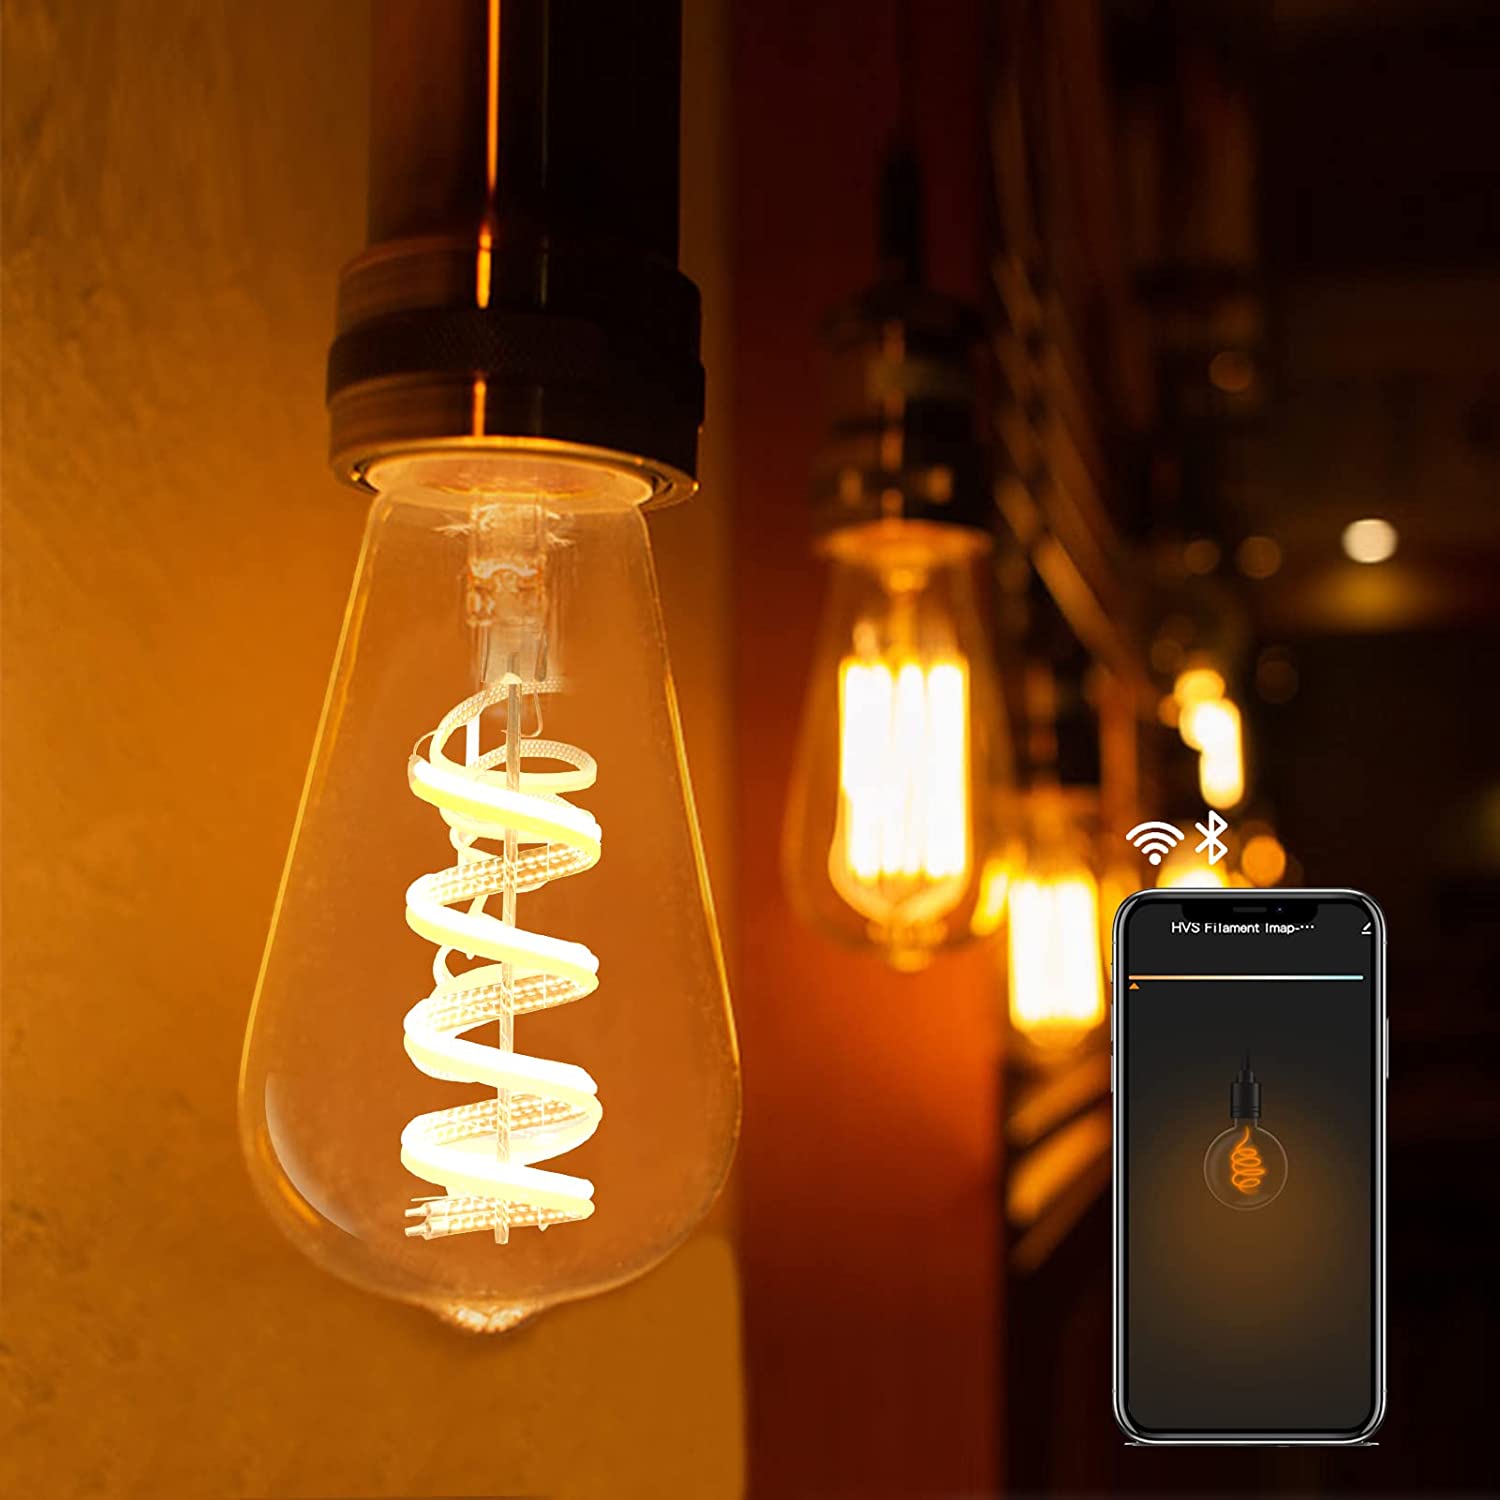 Upgrade Your Home’s Style With Smart Lighting